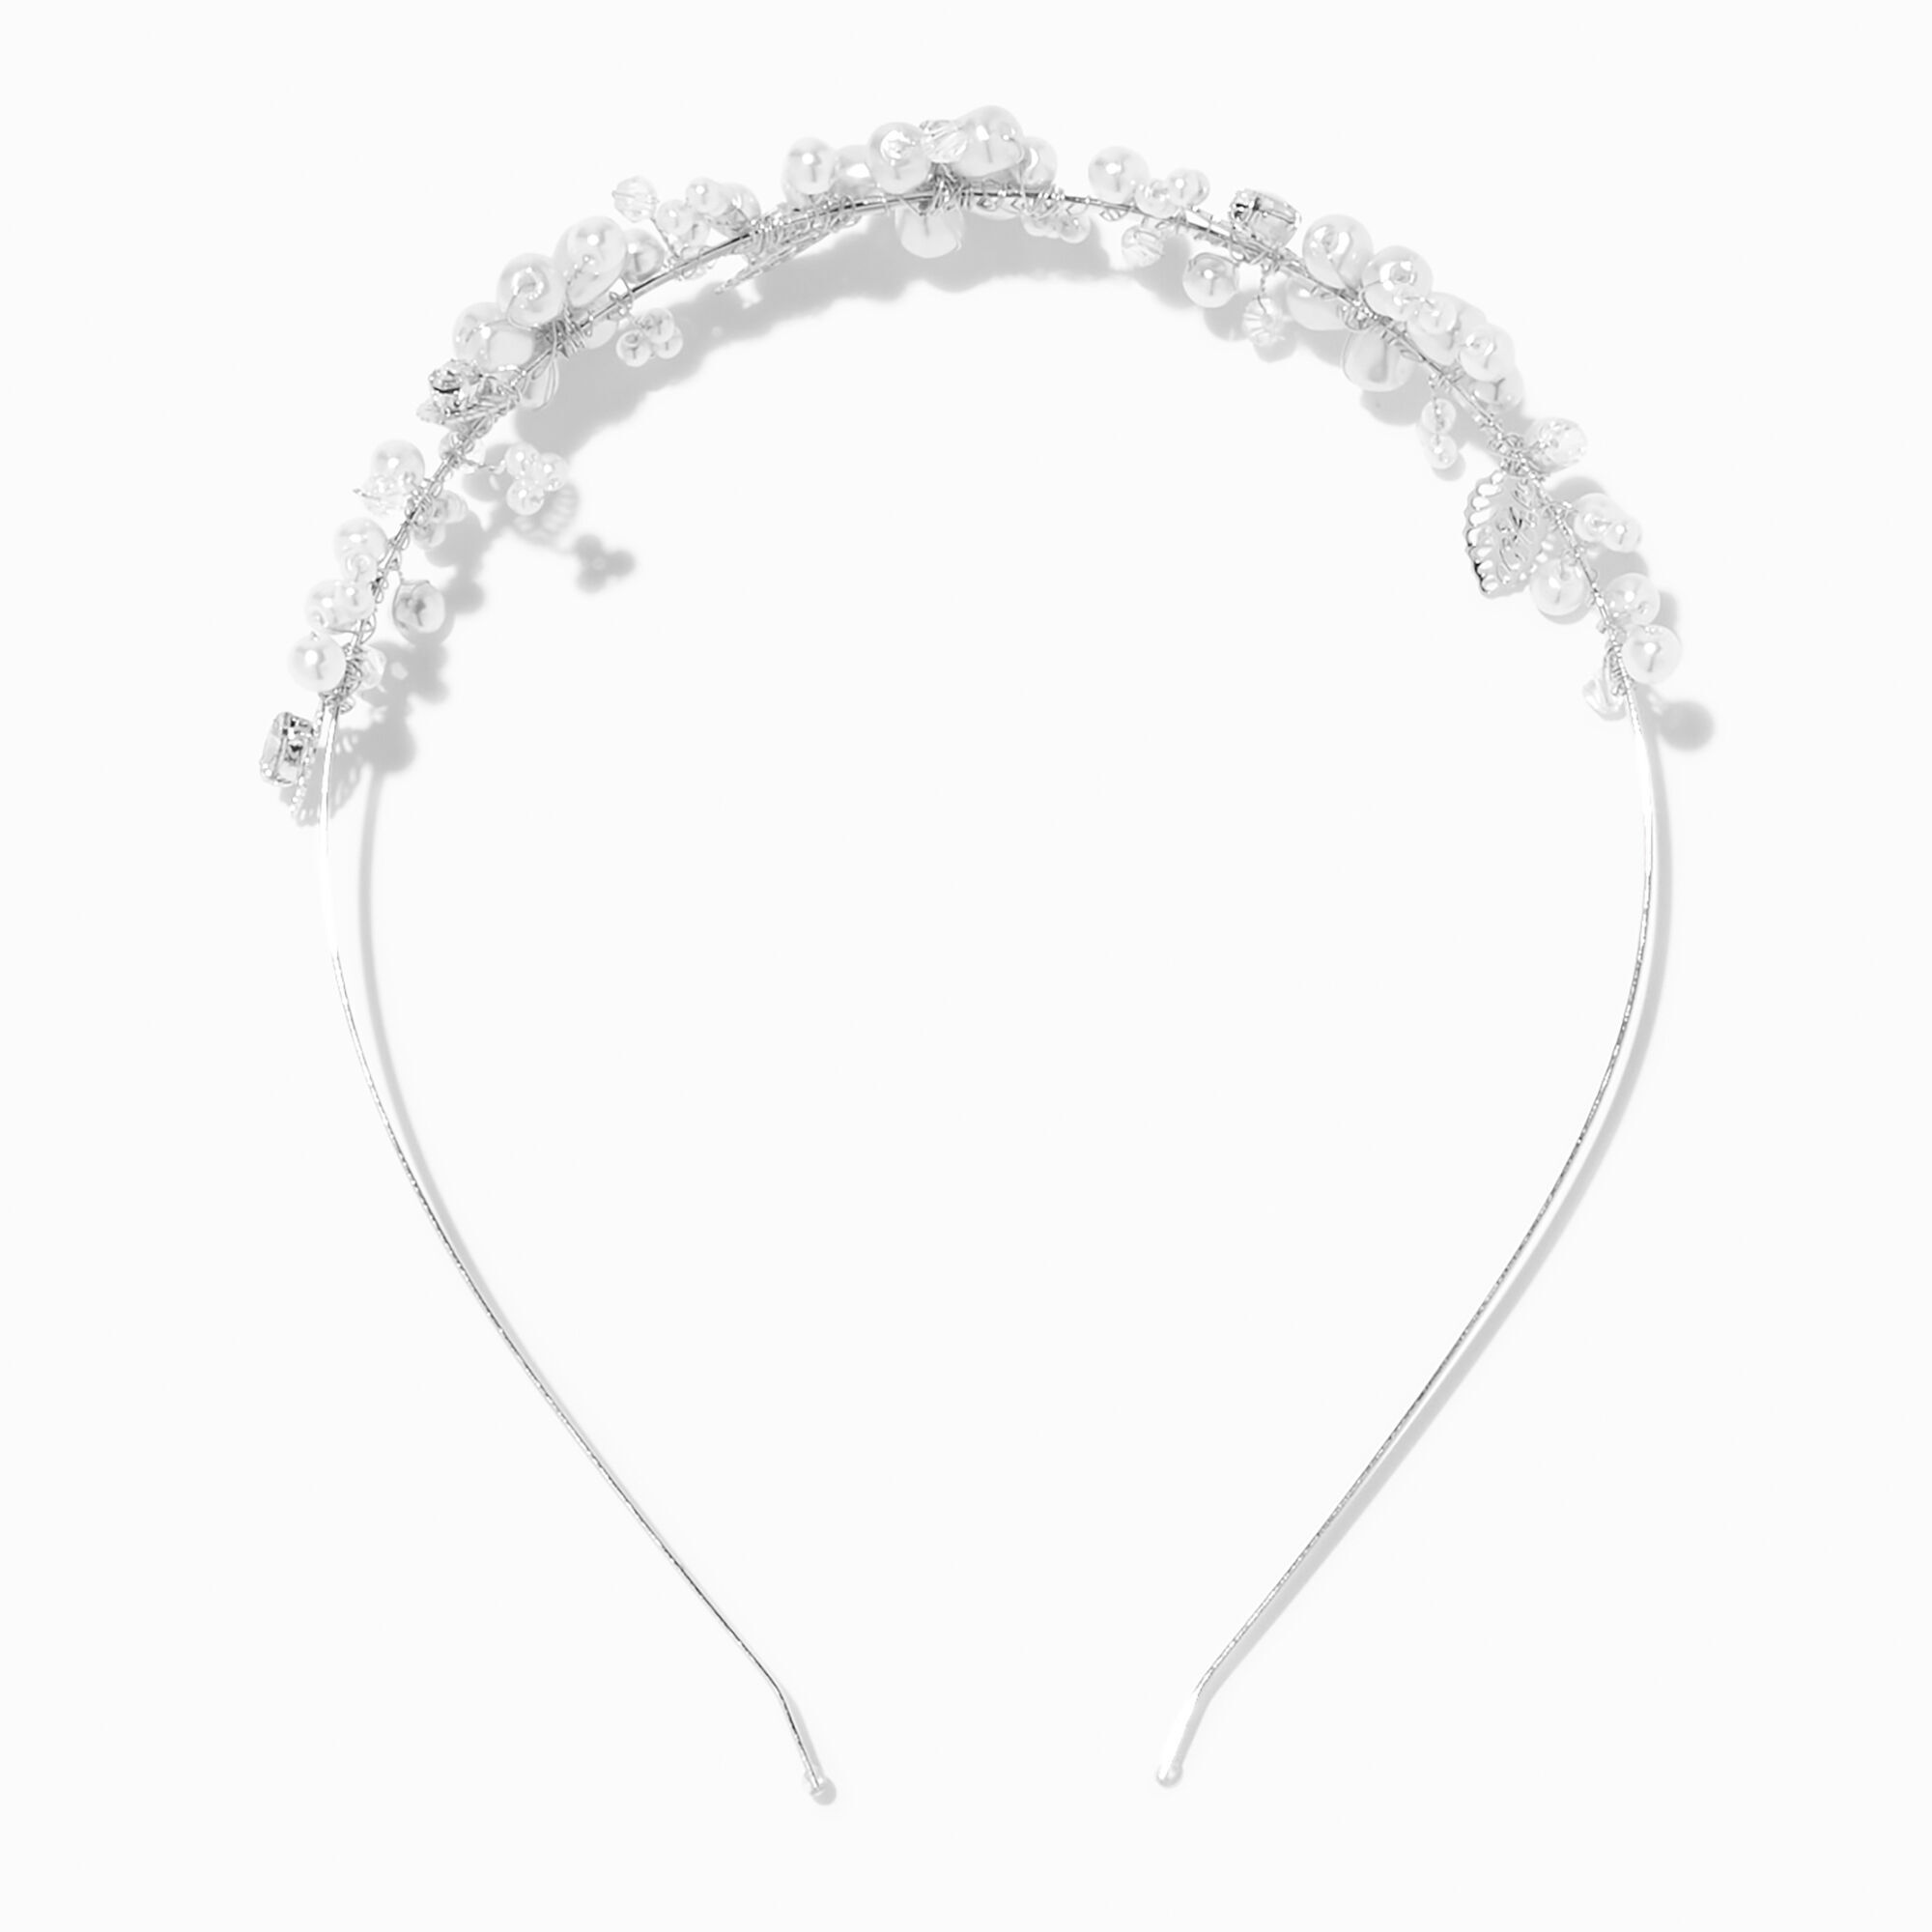 View Claires Crystal Pearl Flower Headband Silver information